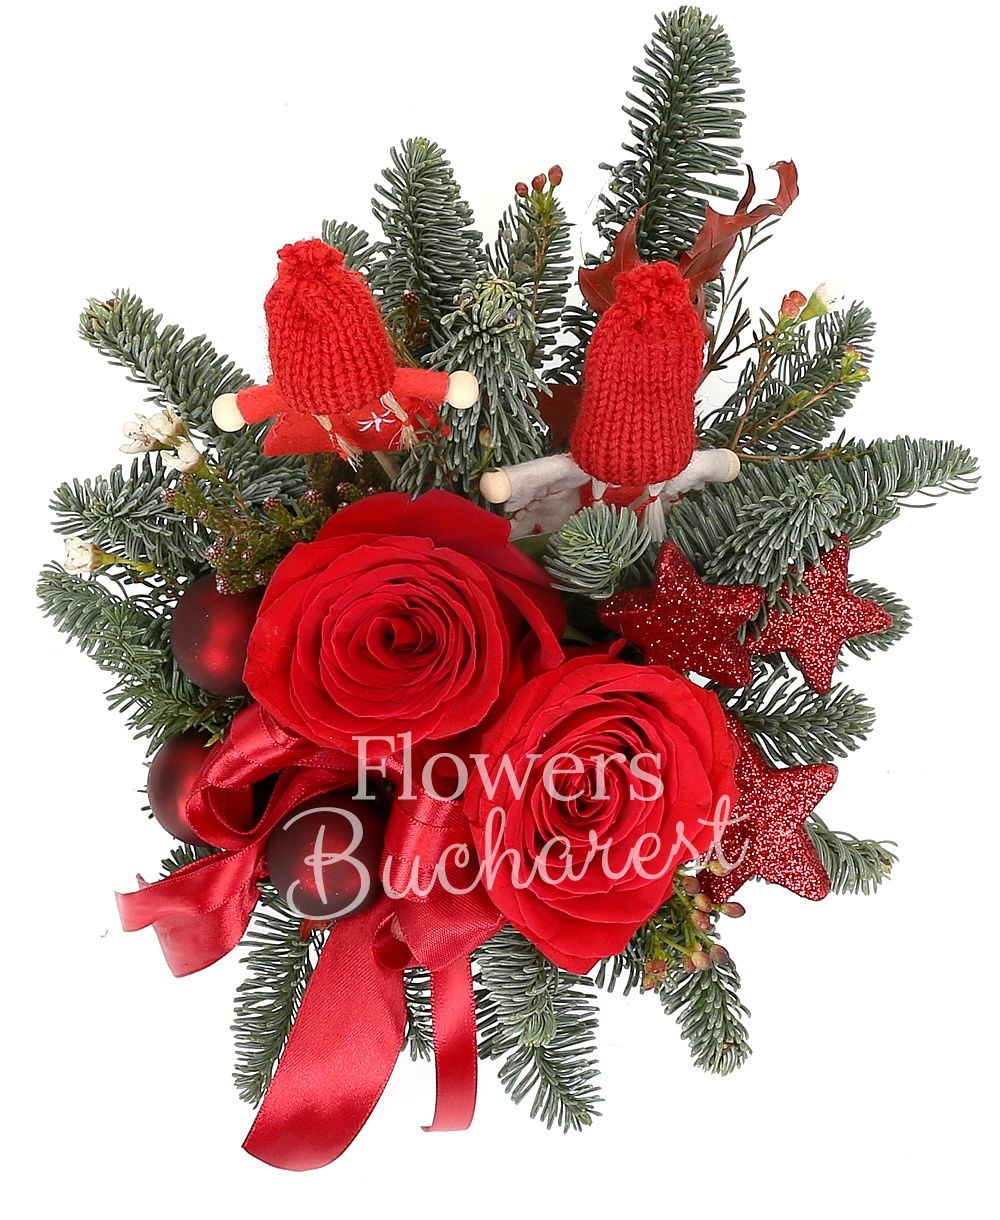 2 red roses, waxflower, brunia, silver fir, christmas decorations, ceramic vase